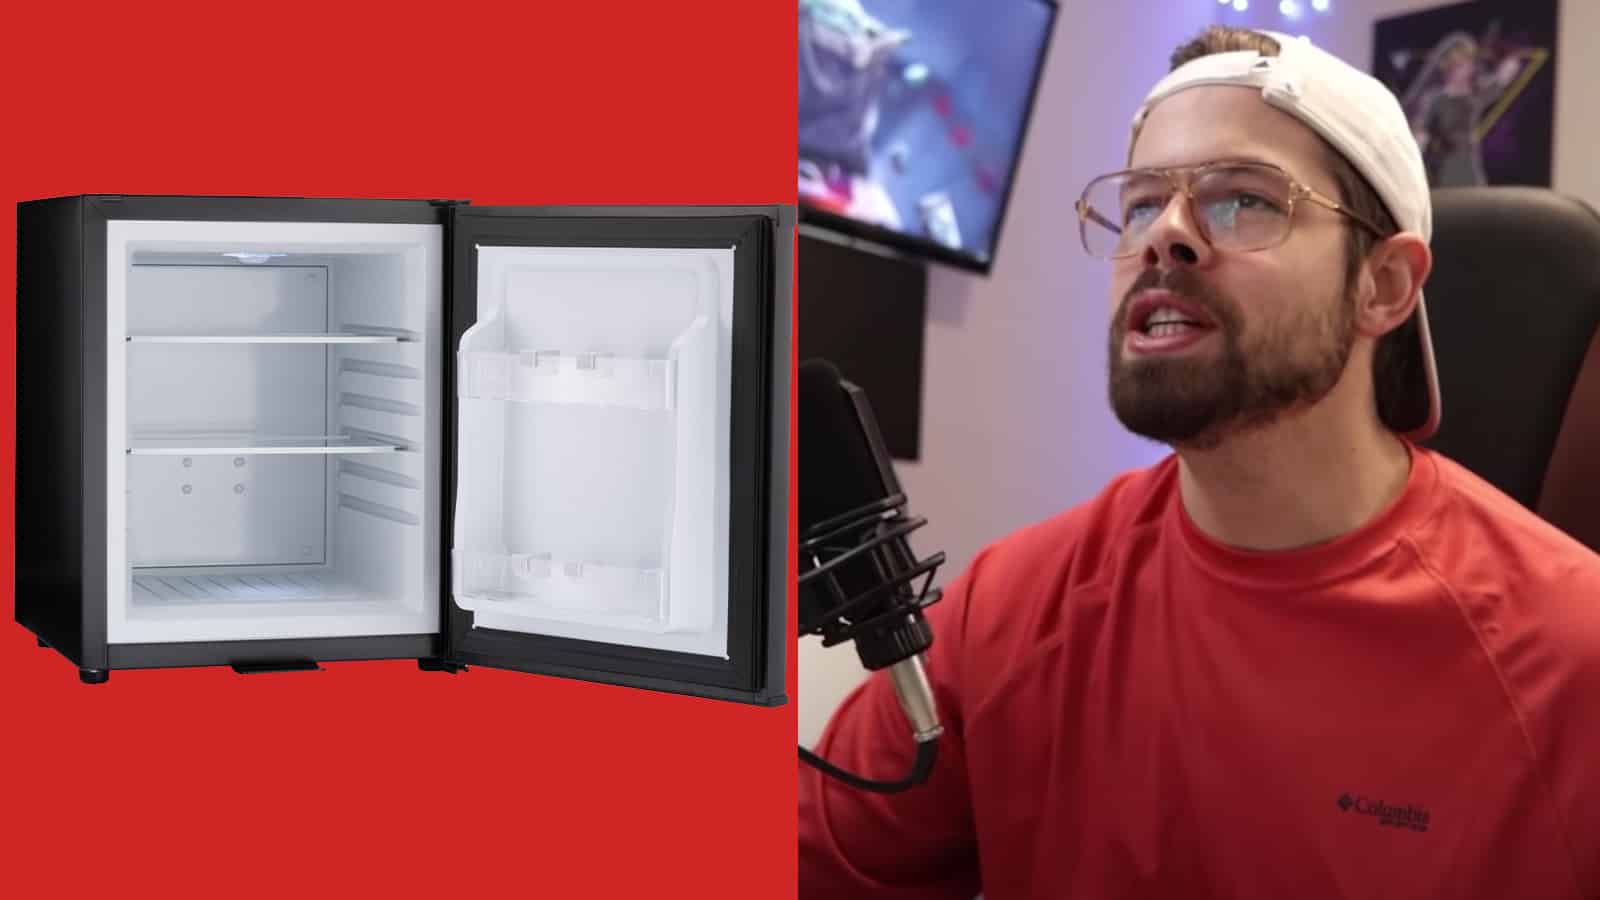 Top 10 Best Gaming Mini Fridges To Keep Your Drinks Cool While You Play! -  ElectronicsHub